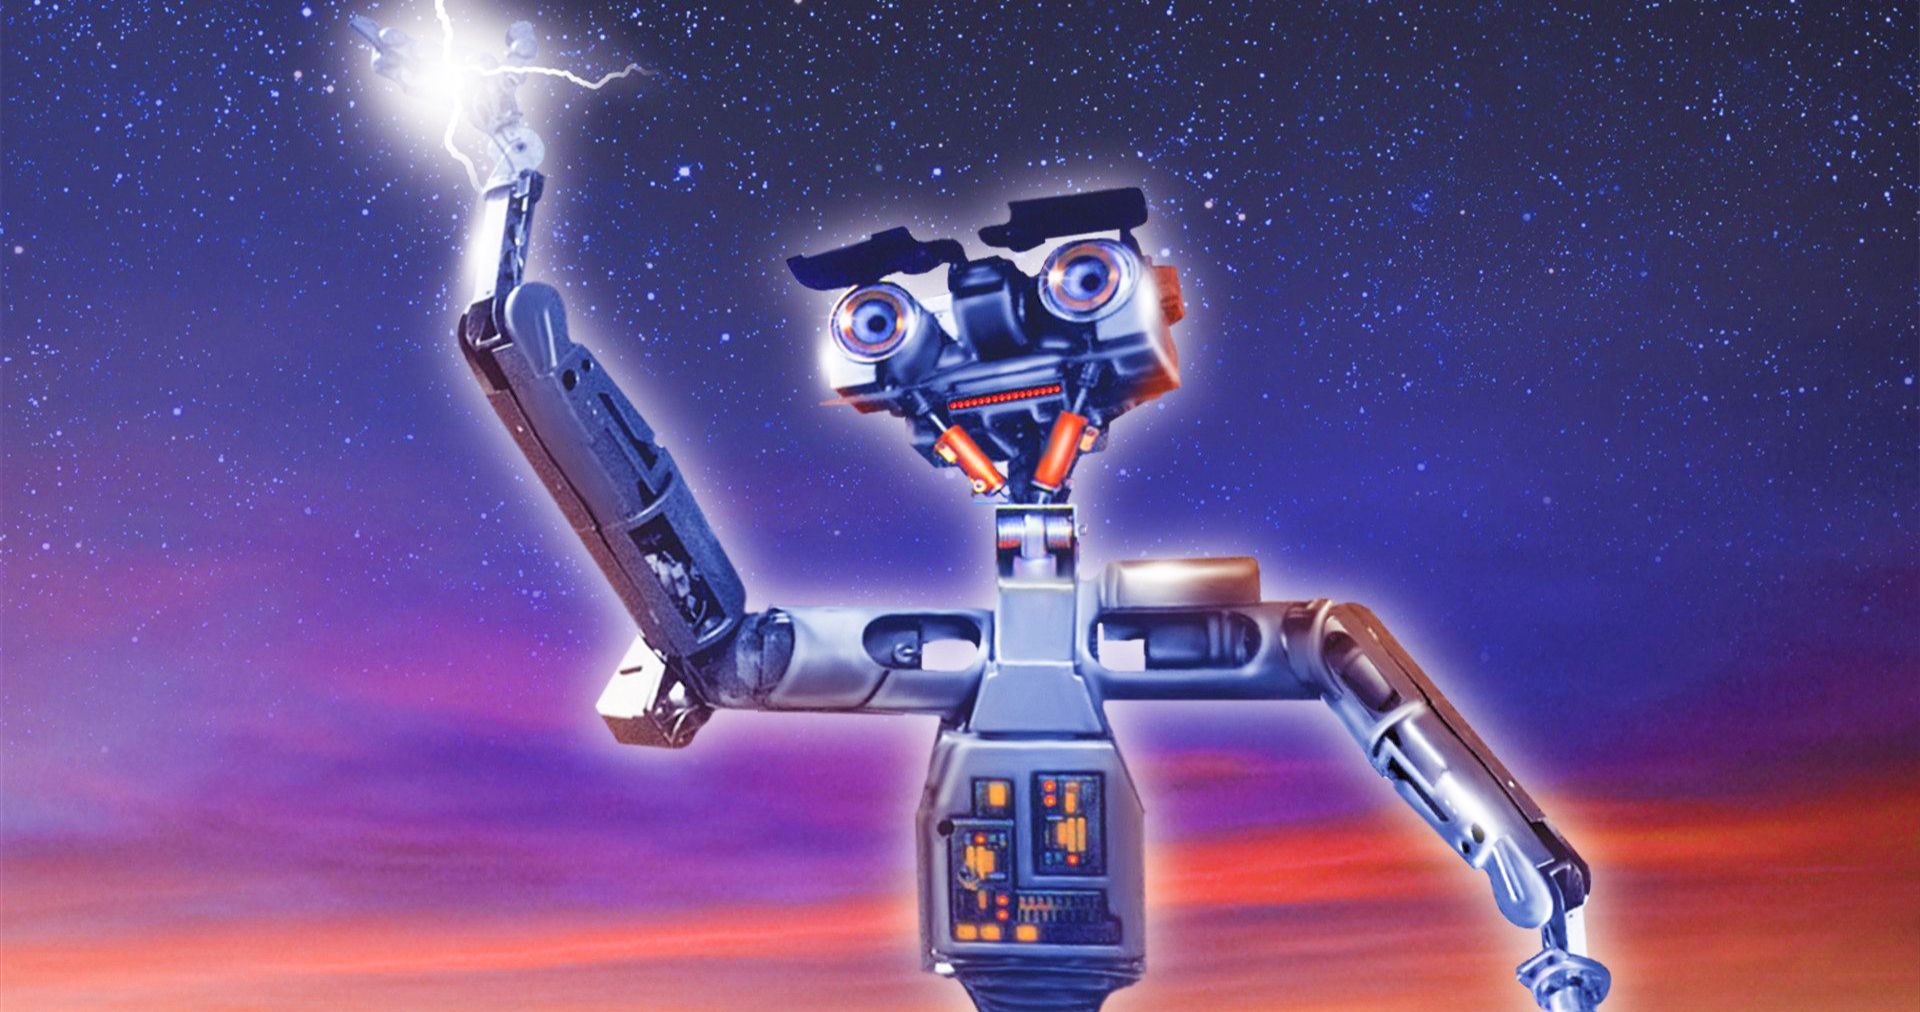 Short Circuit remake in the works from Spyglass Media, Scream 5 producers